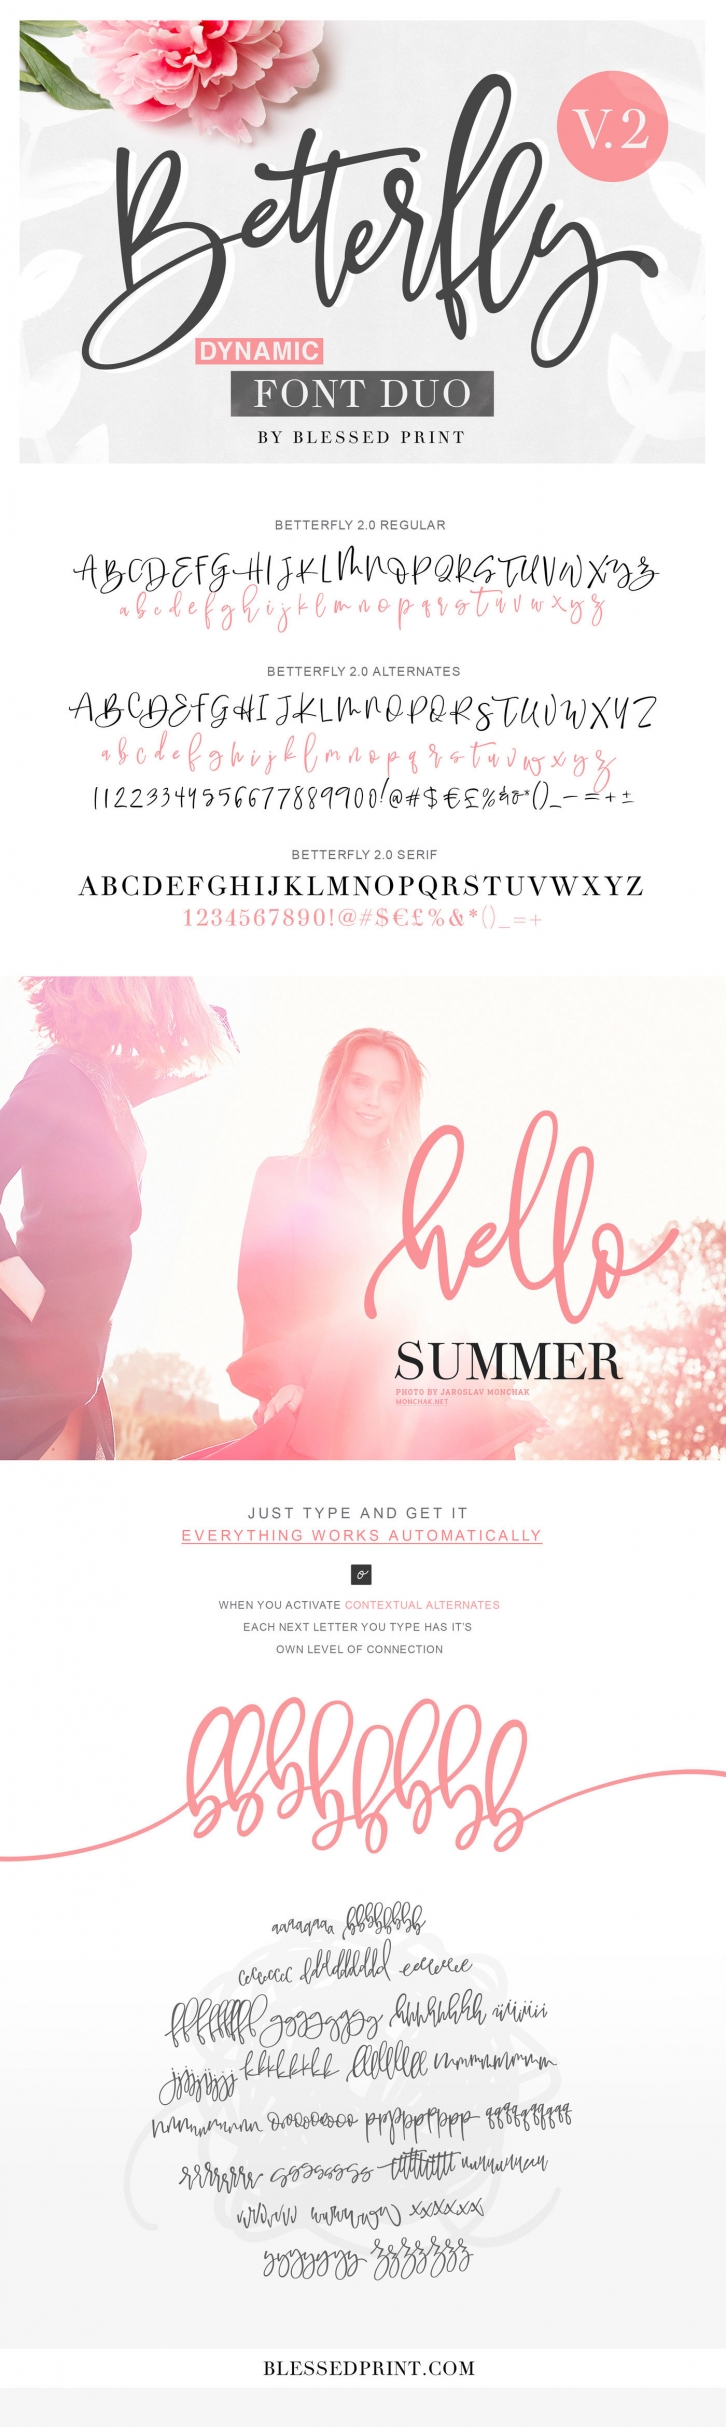 BetterFly 2 - Dynamic Font Duo Font Download